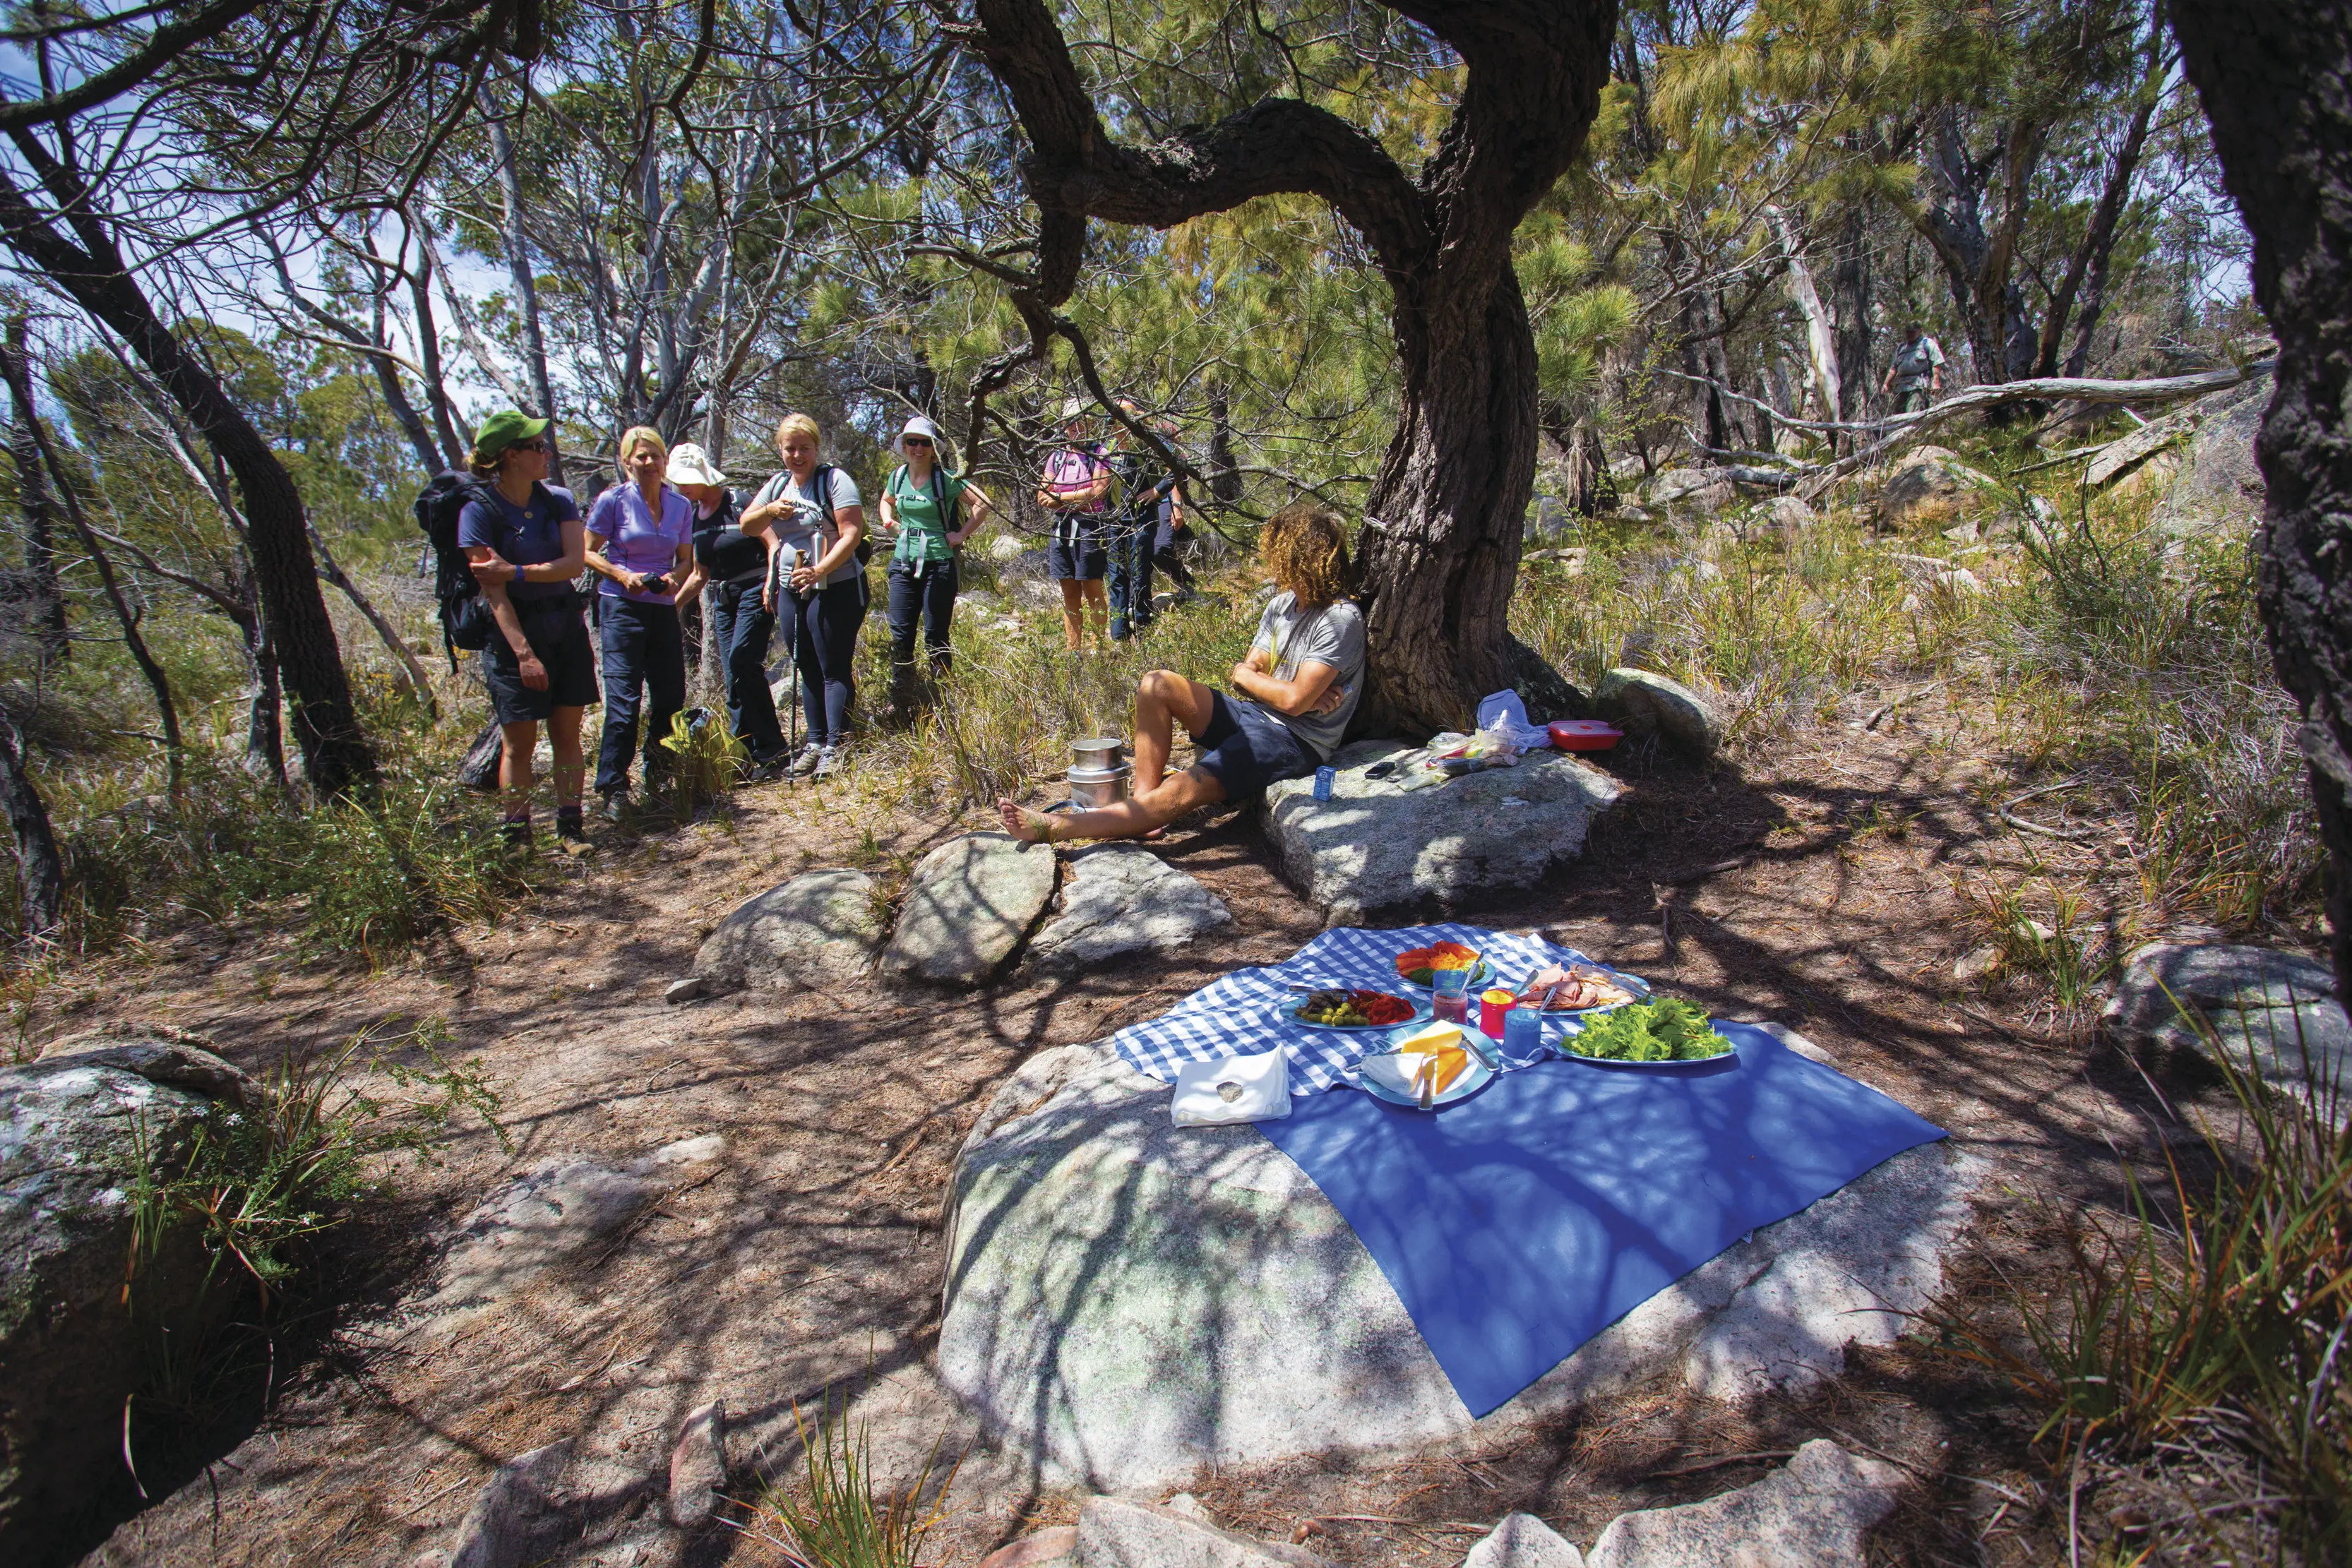 Walkers stop for a picnic style lunch on The Freycinet Experience Walk